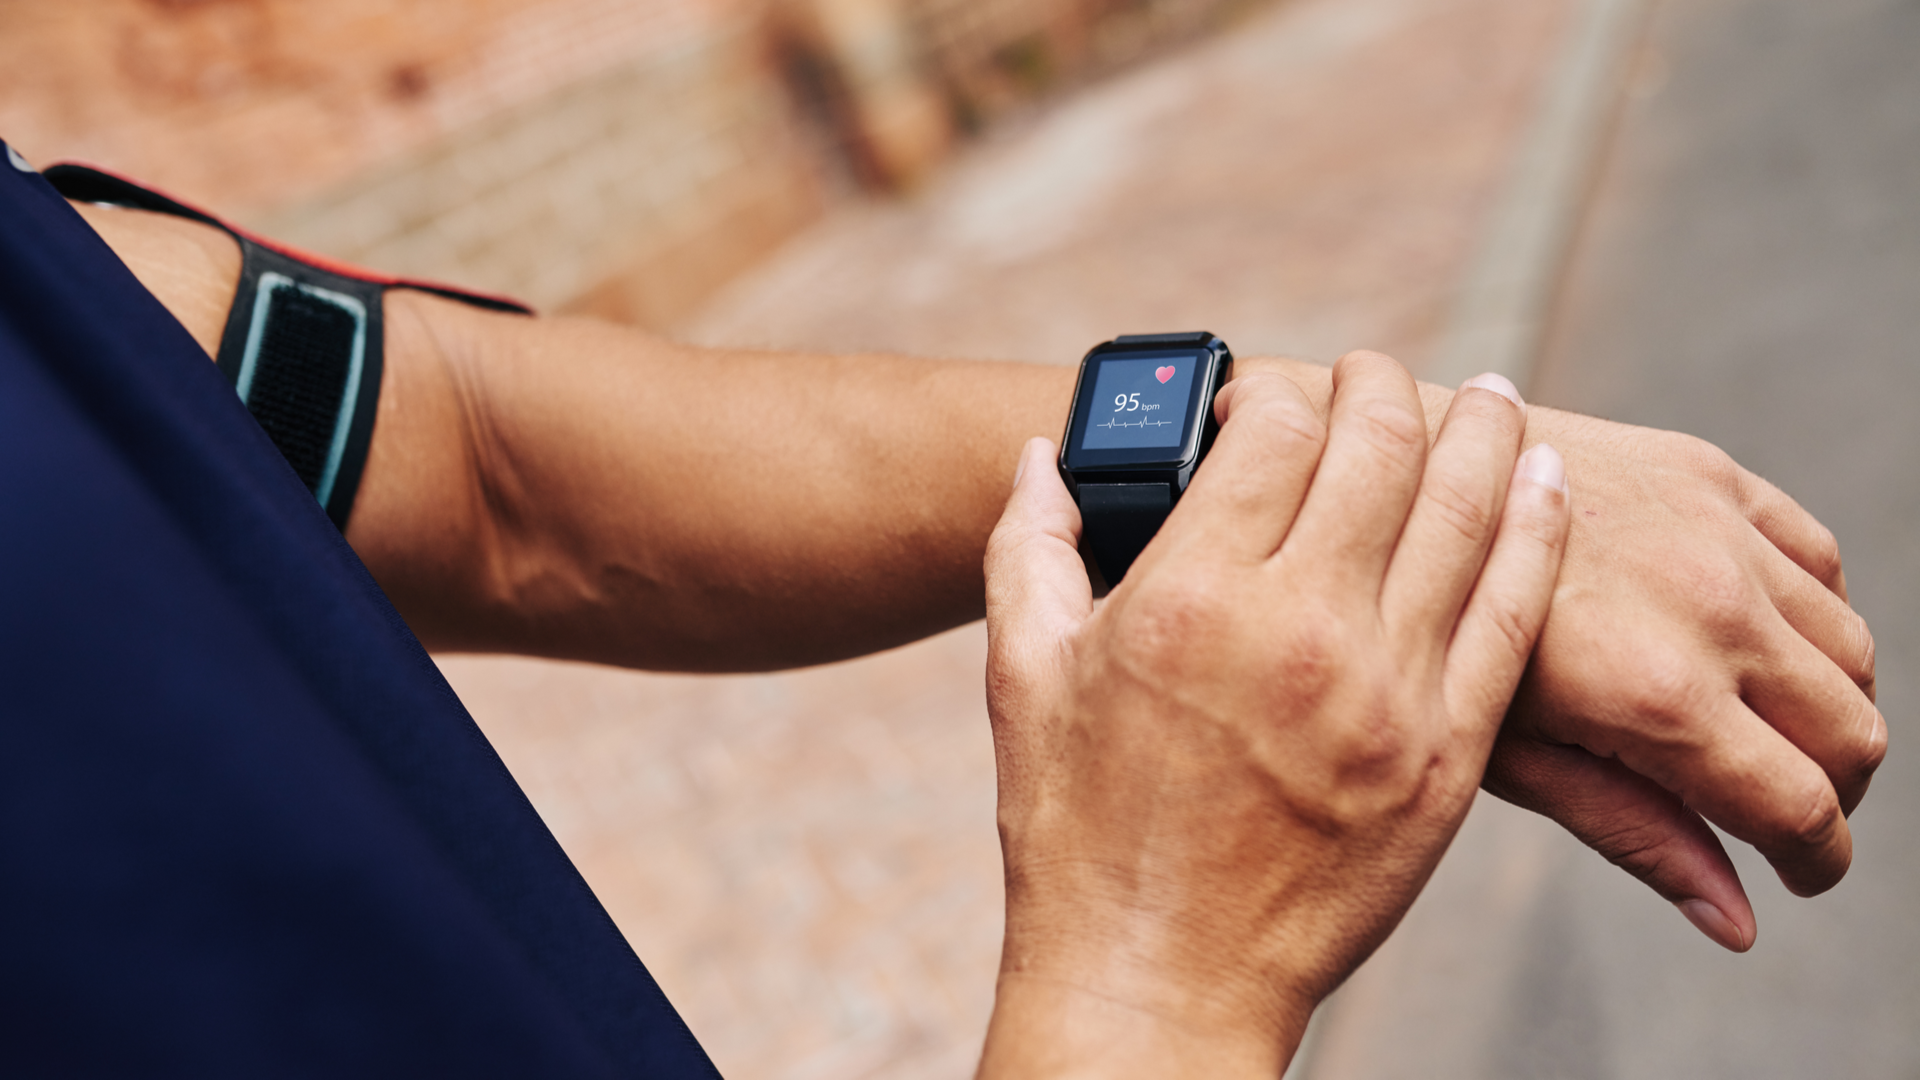 Close-up image of athlete checking their pulse on a smart watch